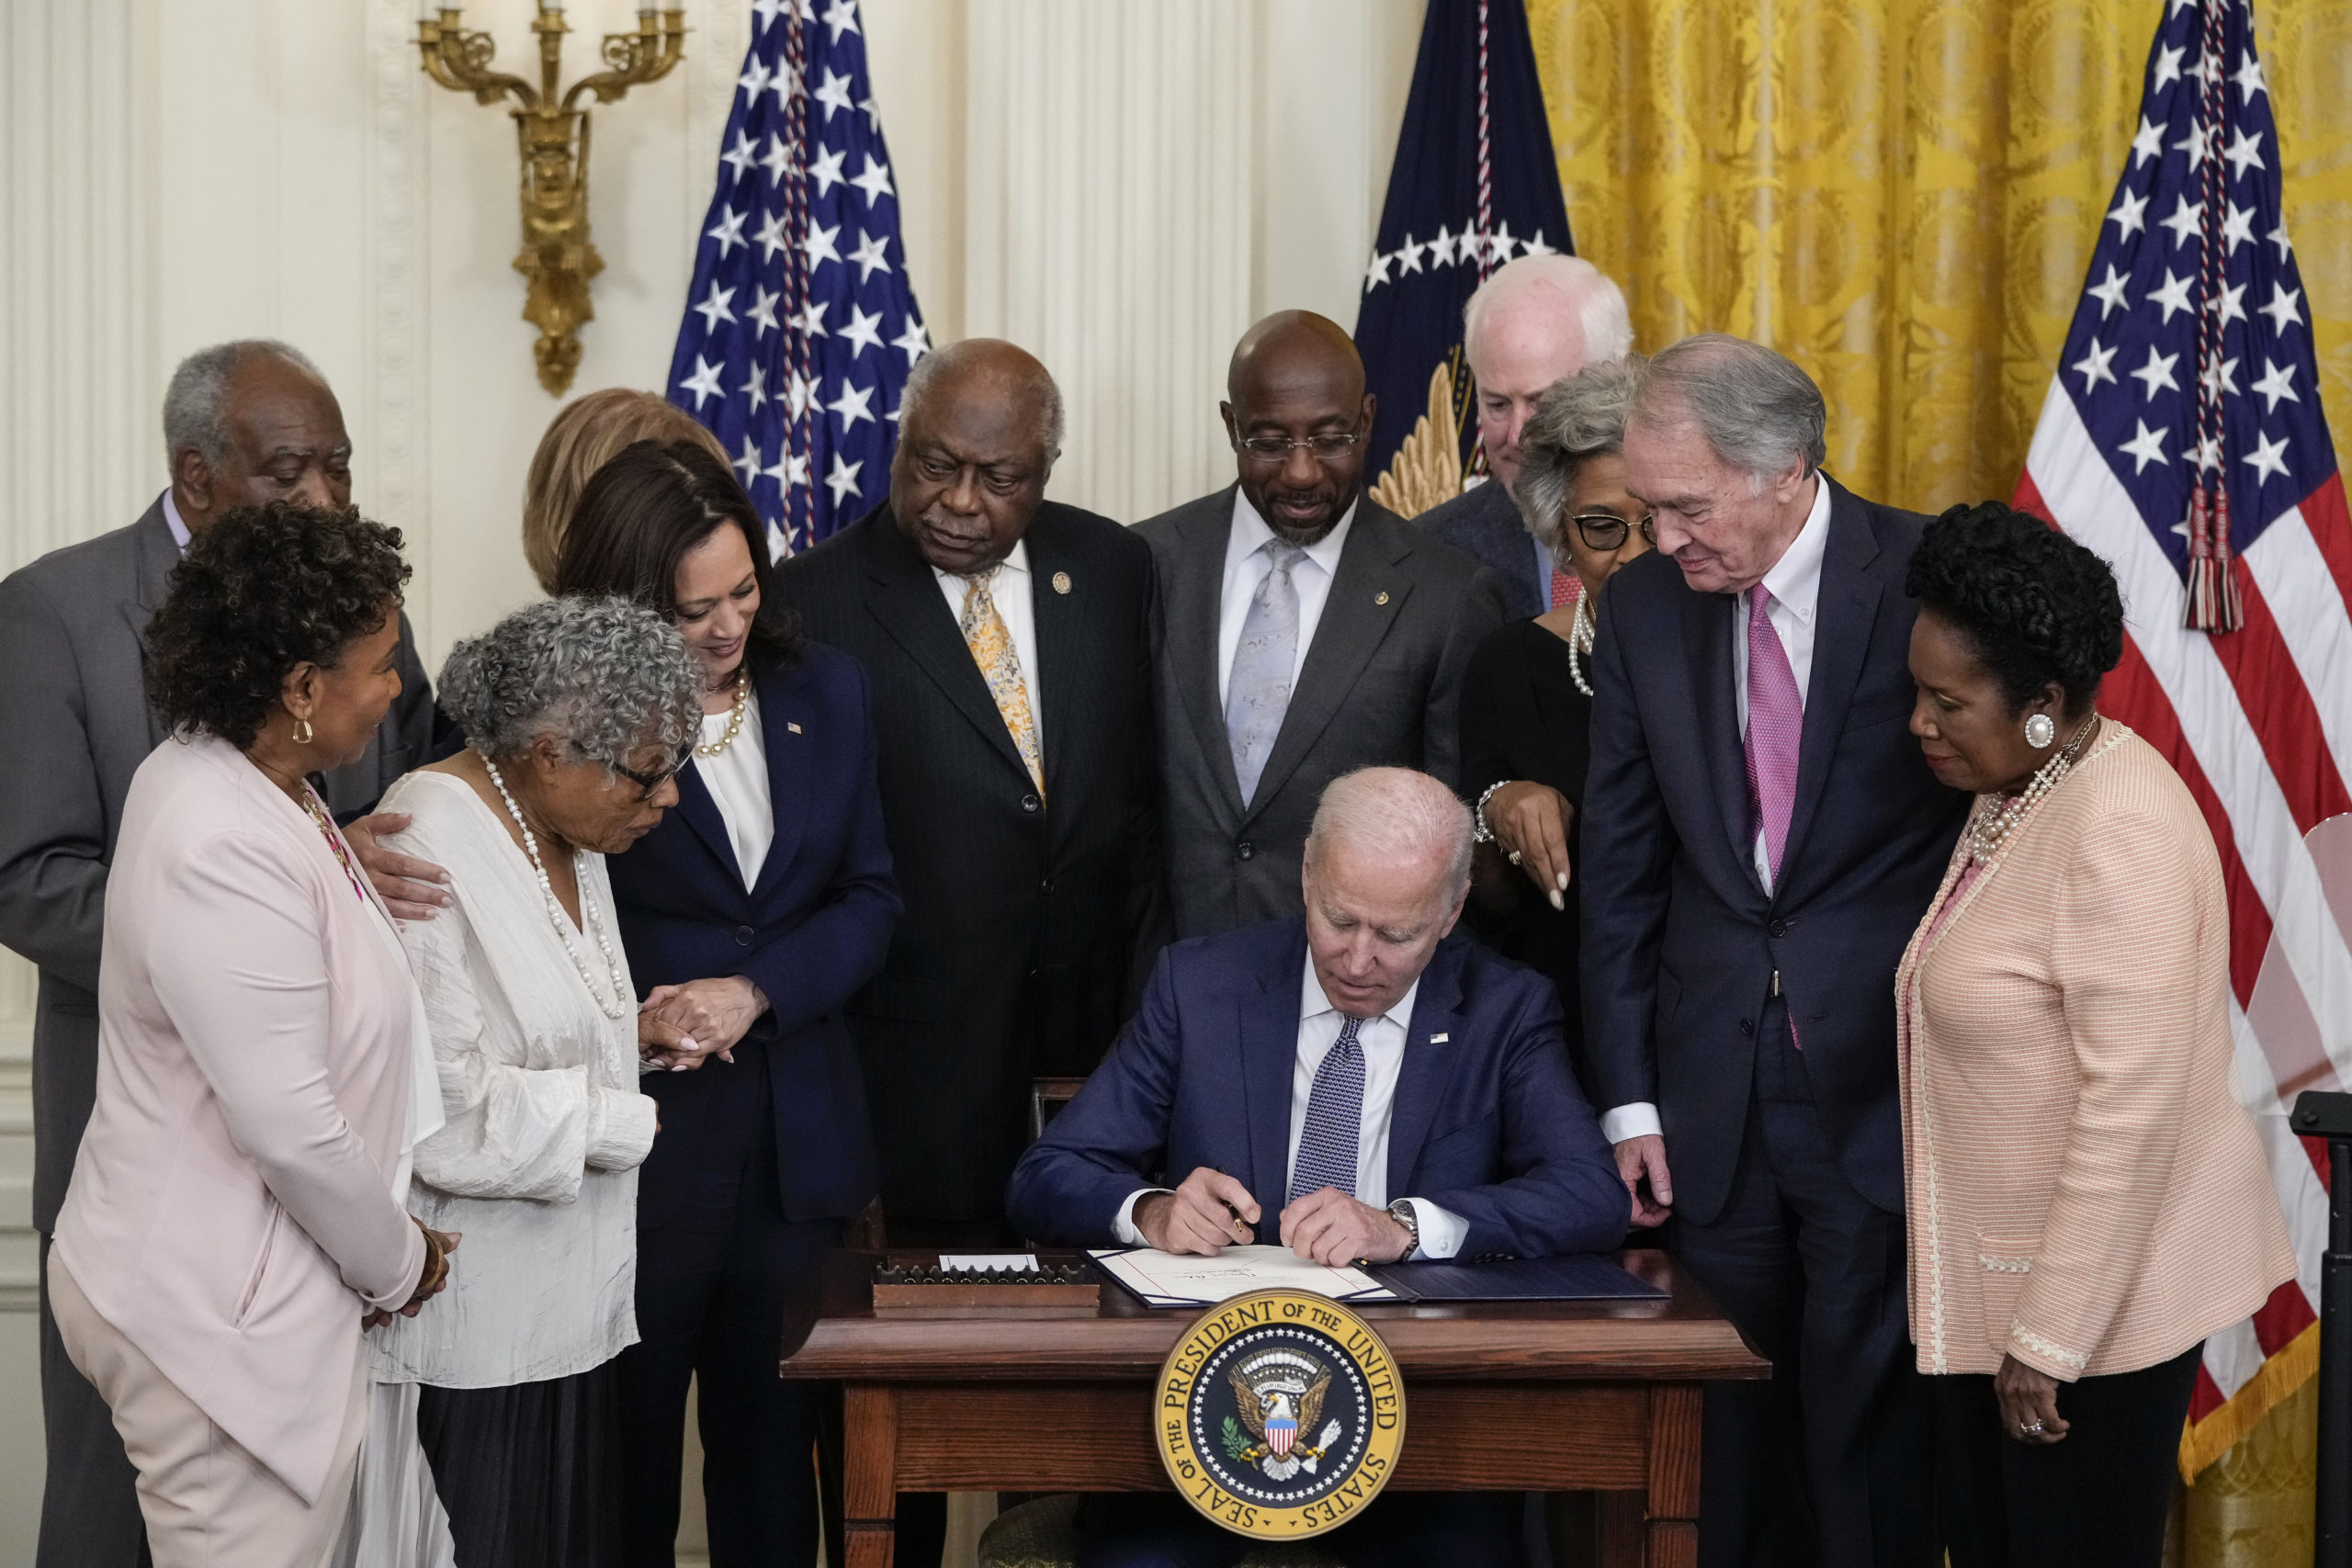 U.S. President Joe Biden signs the Juneteenth National Independence Day Act into law in the East Room of the White House on June 17, 2021 in Washington, DC. (Drew Angerer/Getty Images)